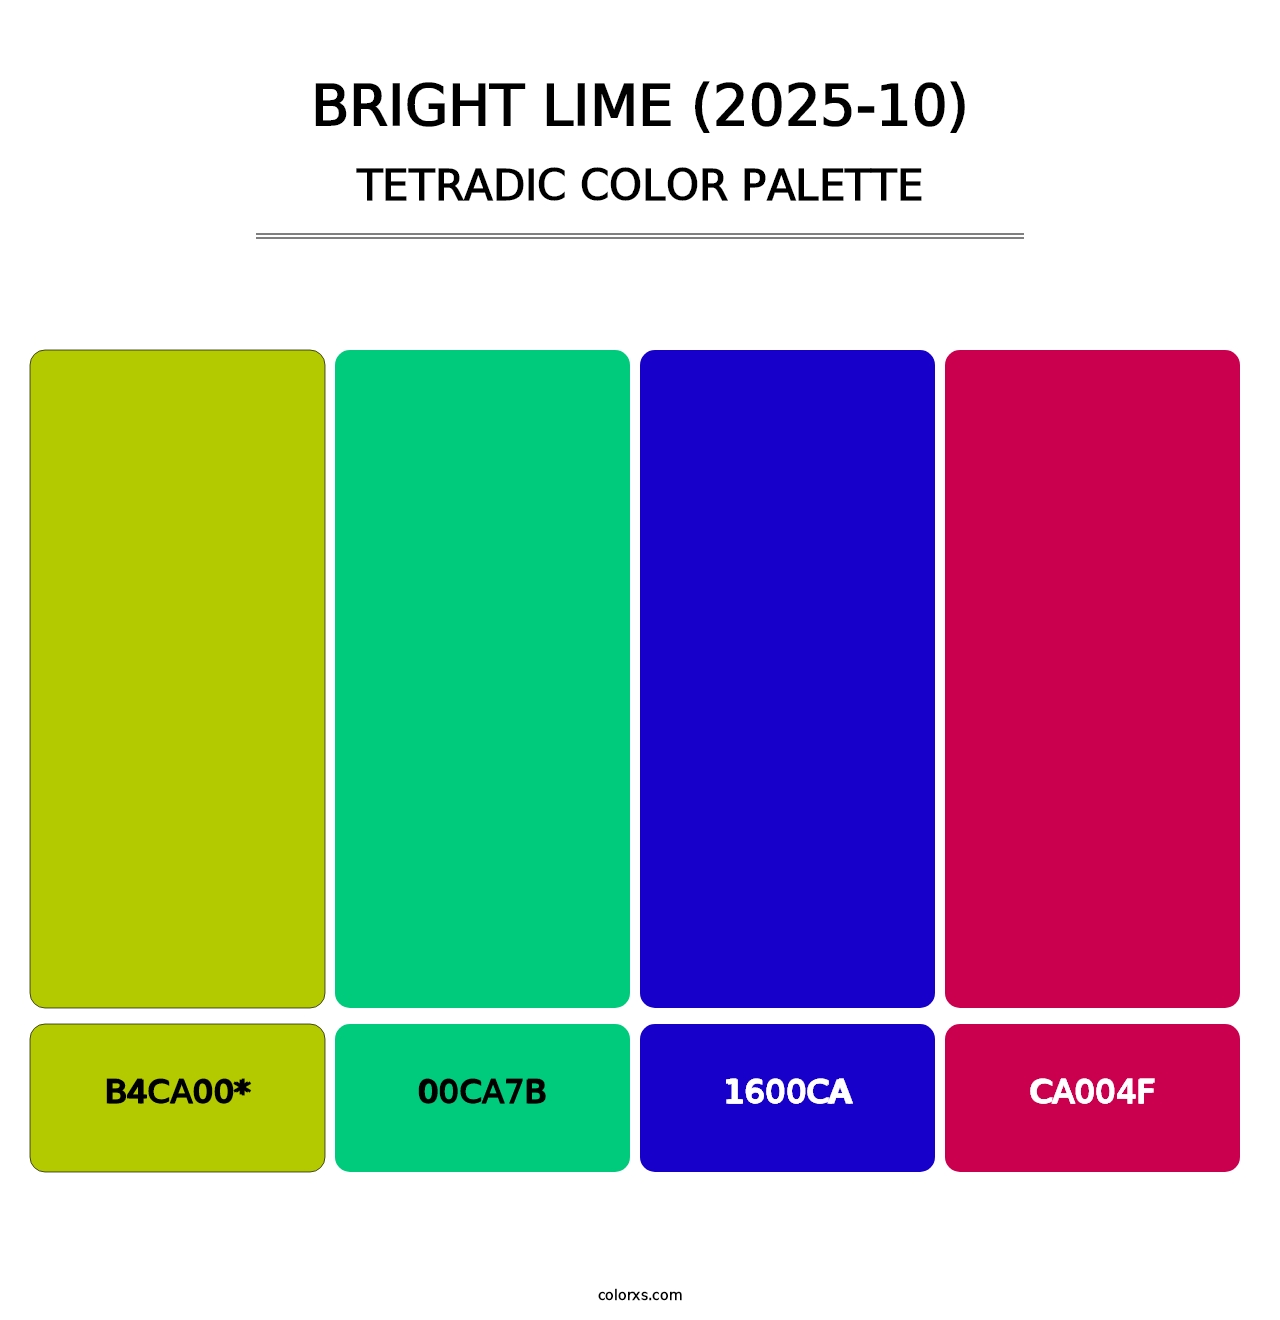 Bright Lime (2025-10) - Tetradic Color Palette